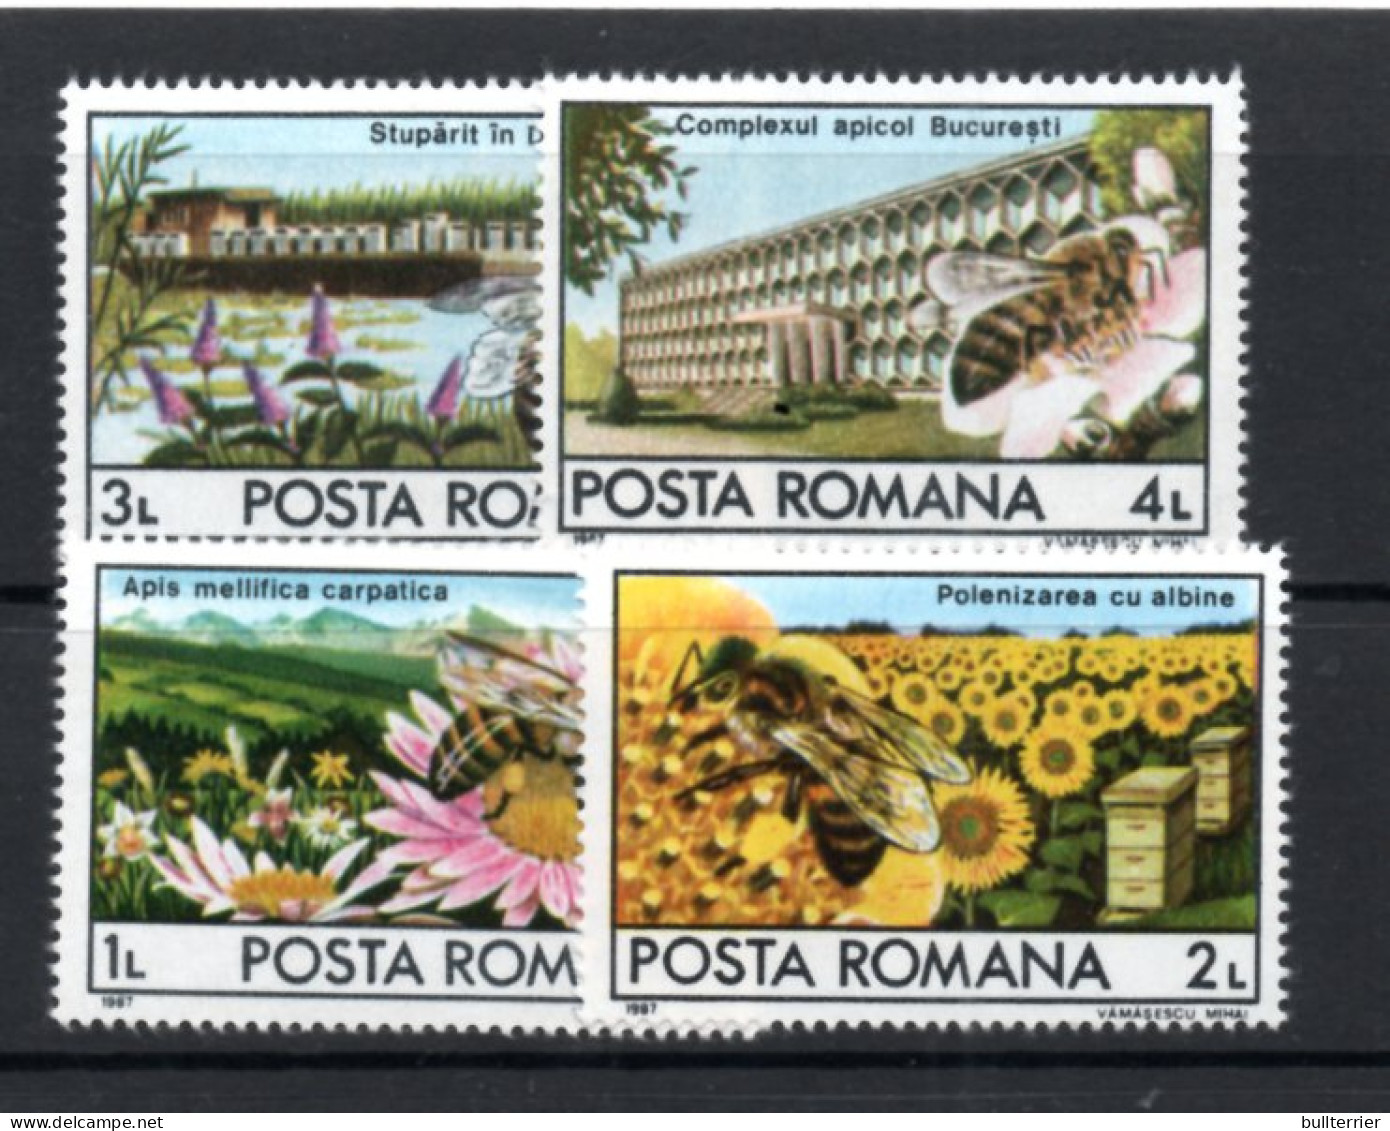 INSECTS - ROMANIA - 1987 - APICULTURE SET OF 4 MINT NEVER HINGED  - Abeilles